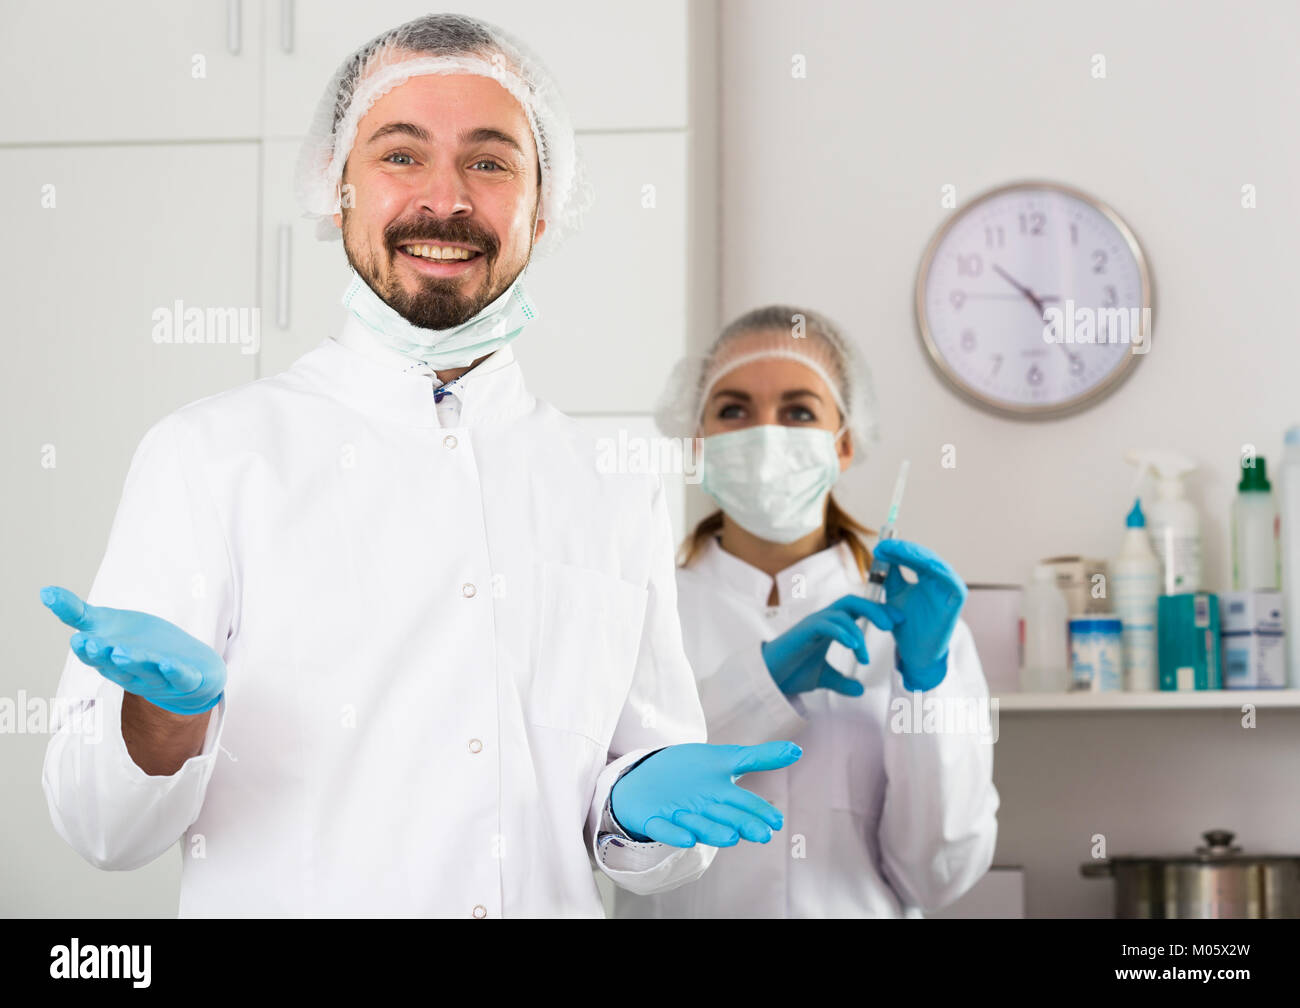 Smiling woman nurse and man doctor ready to work in office Stock Photo